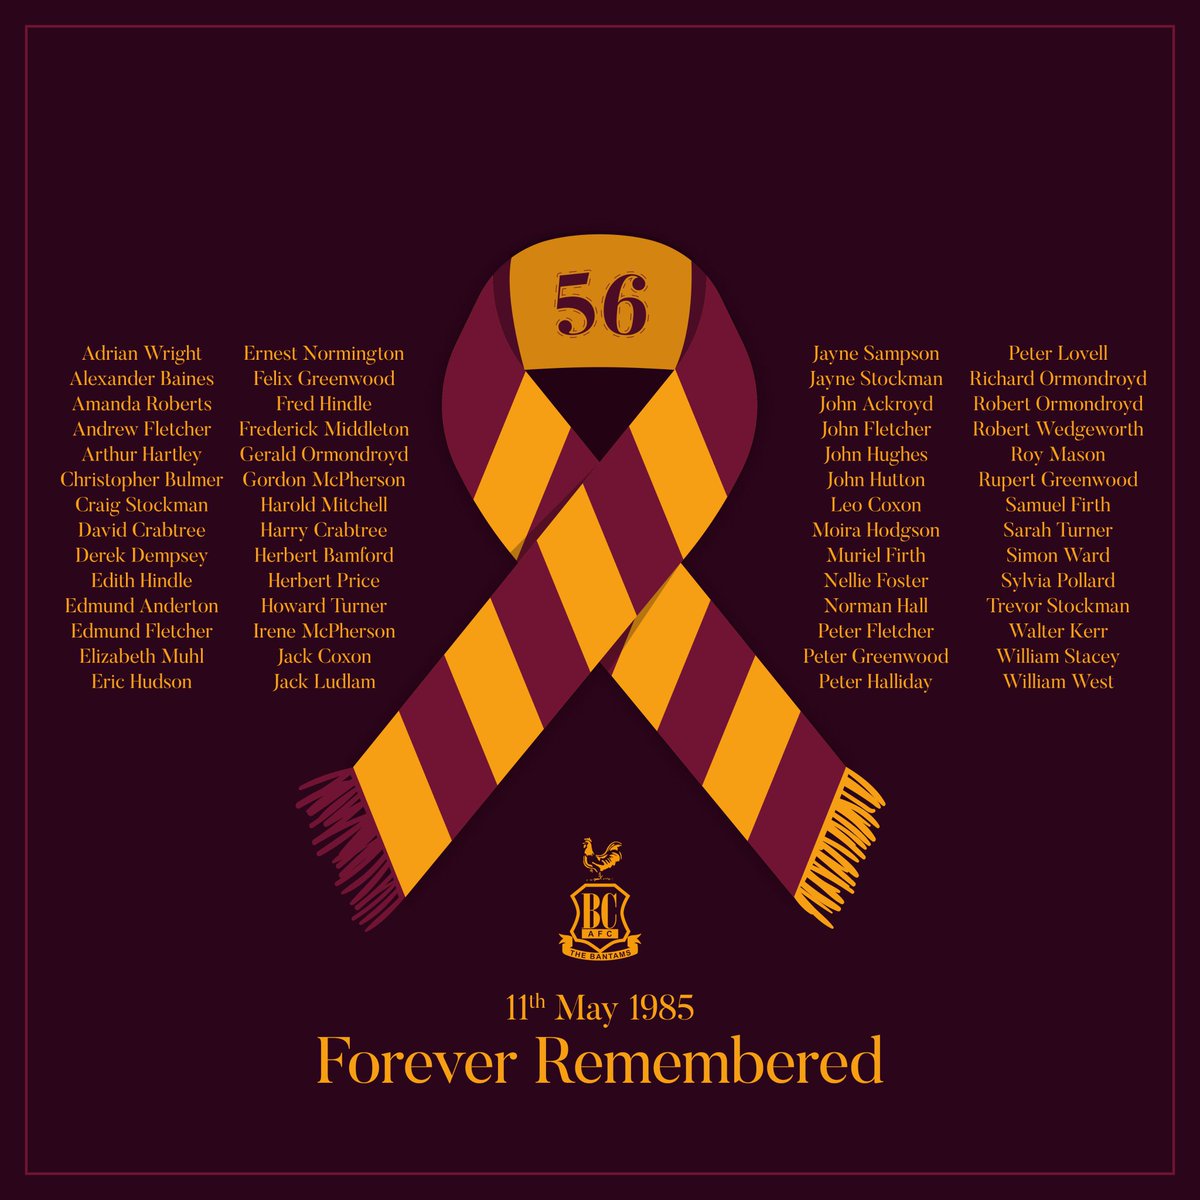 On this day 39 years ago, 56 football fans just like you and I travelled to Valley Parade to watch their team but tragically never returned home. Never forget #rip56 #htafc #bcafc #footballfamily